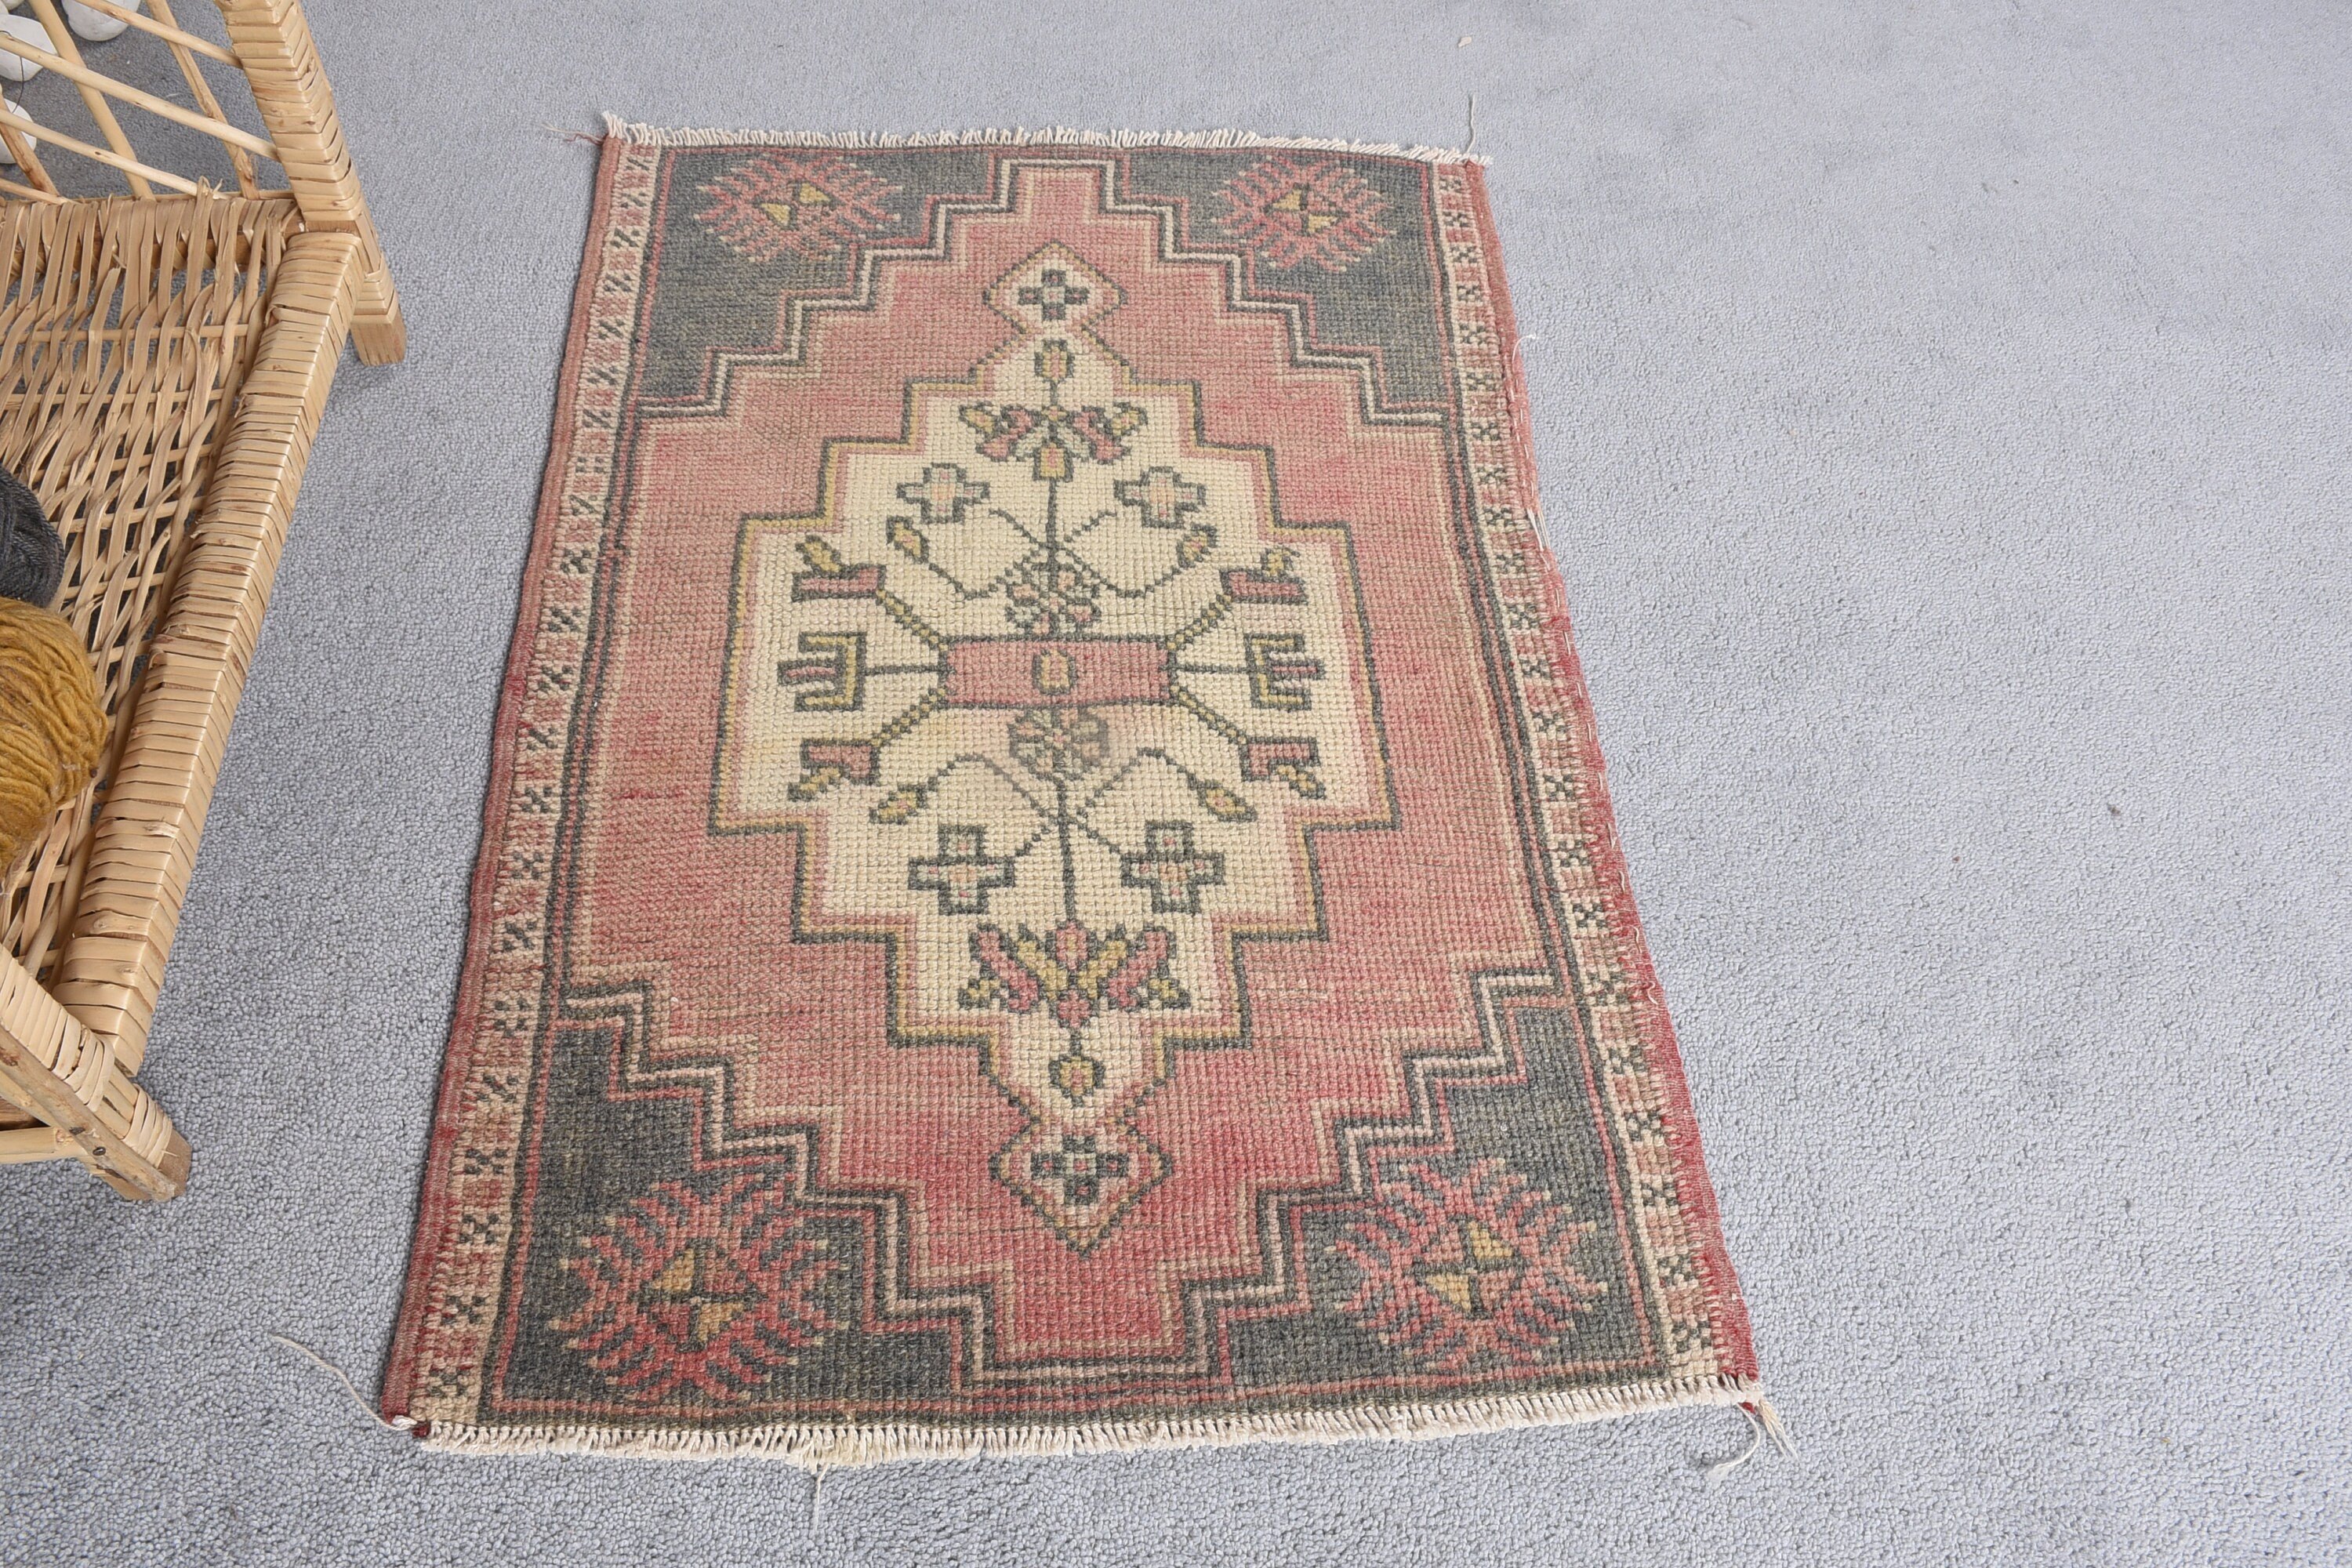 Red Antique Rug, Vintage Rug, Kitchen Rugs, Rugs for Bath, Wall Hanging Rug, Turkish Rug, Nursery Rugs, 1.7x2.5 ft Small Rug